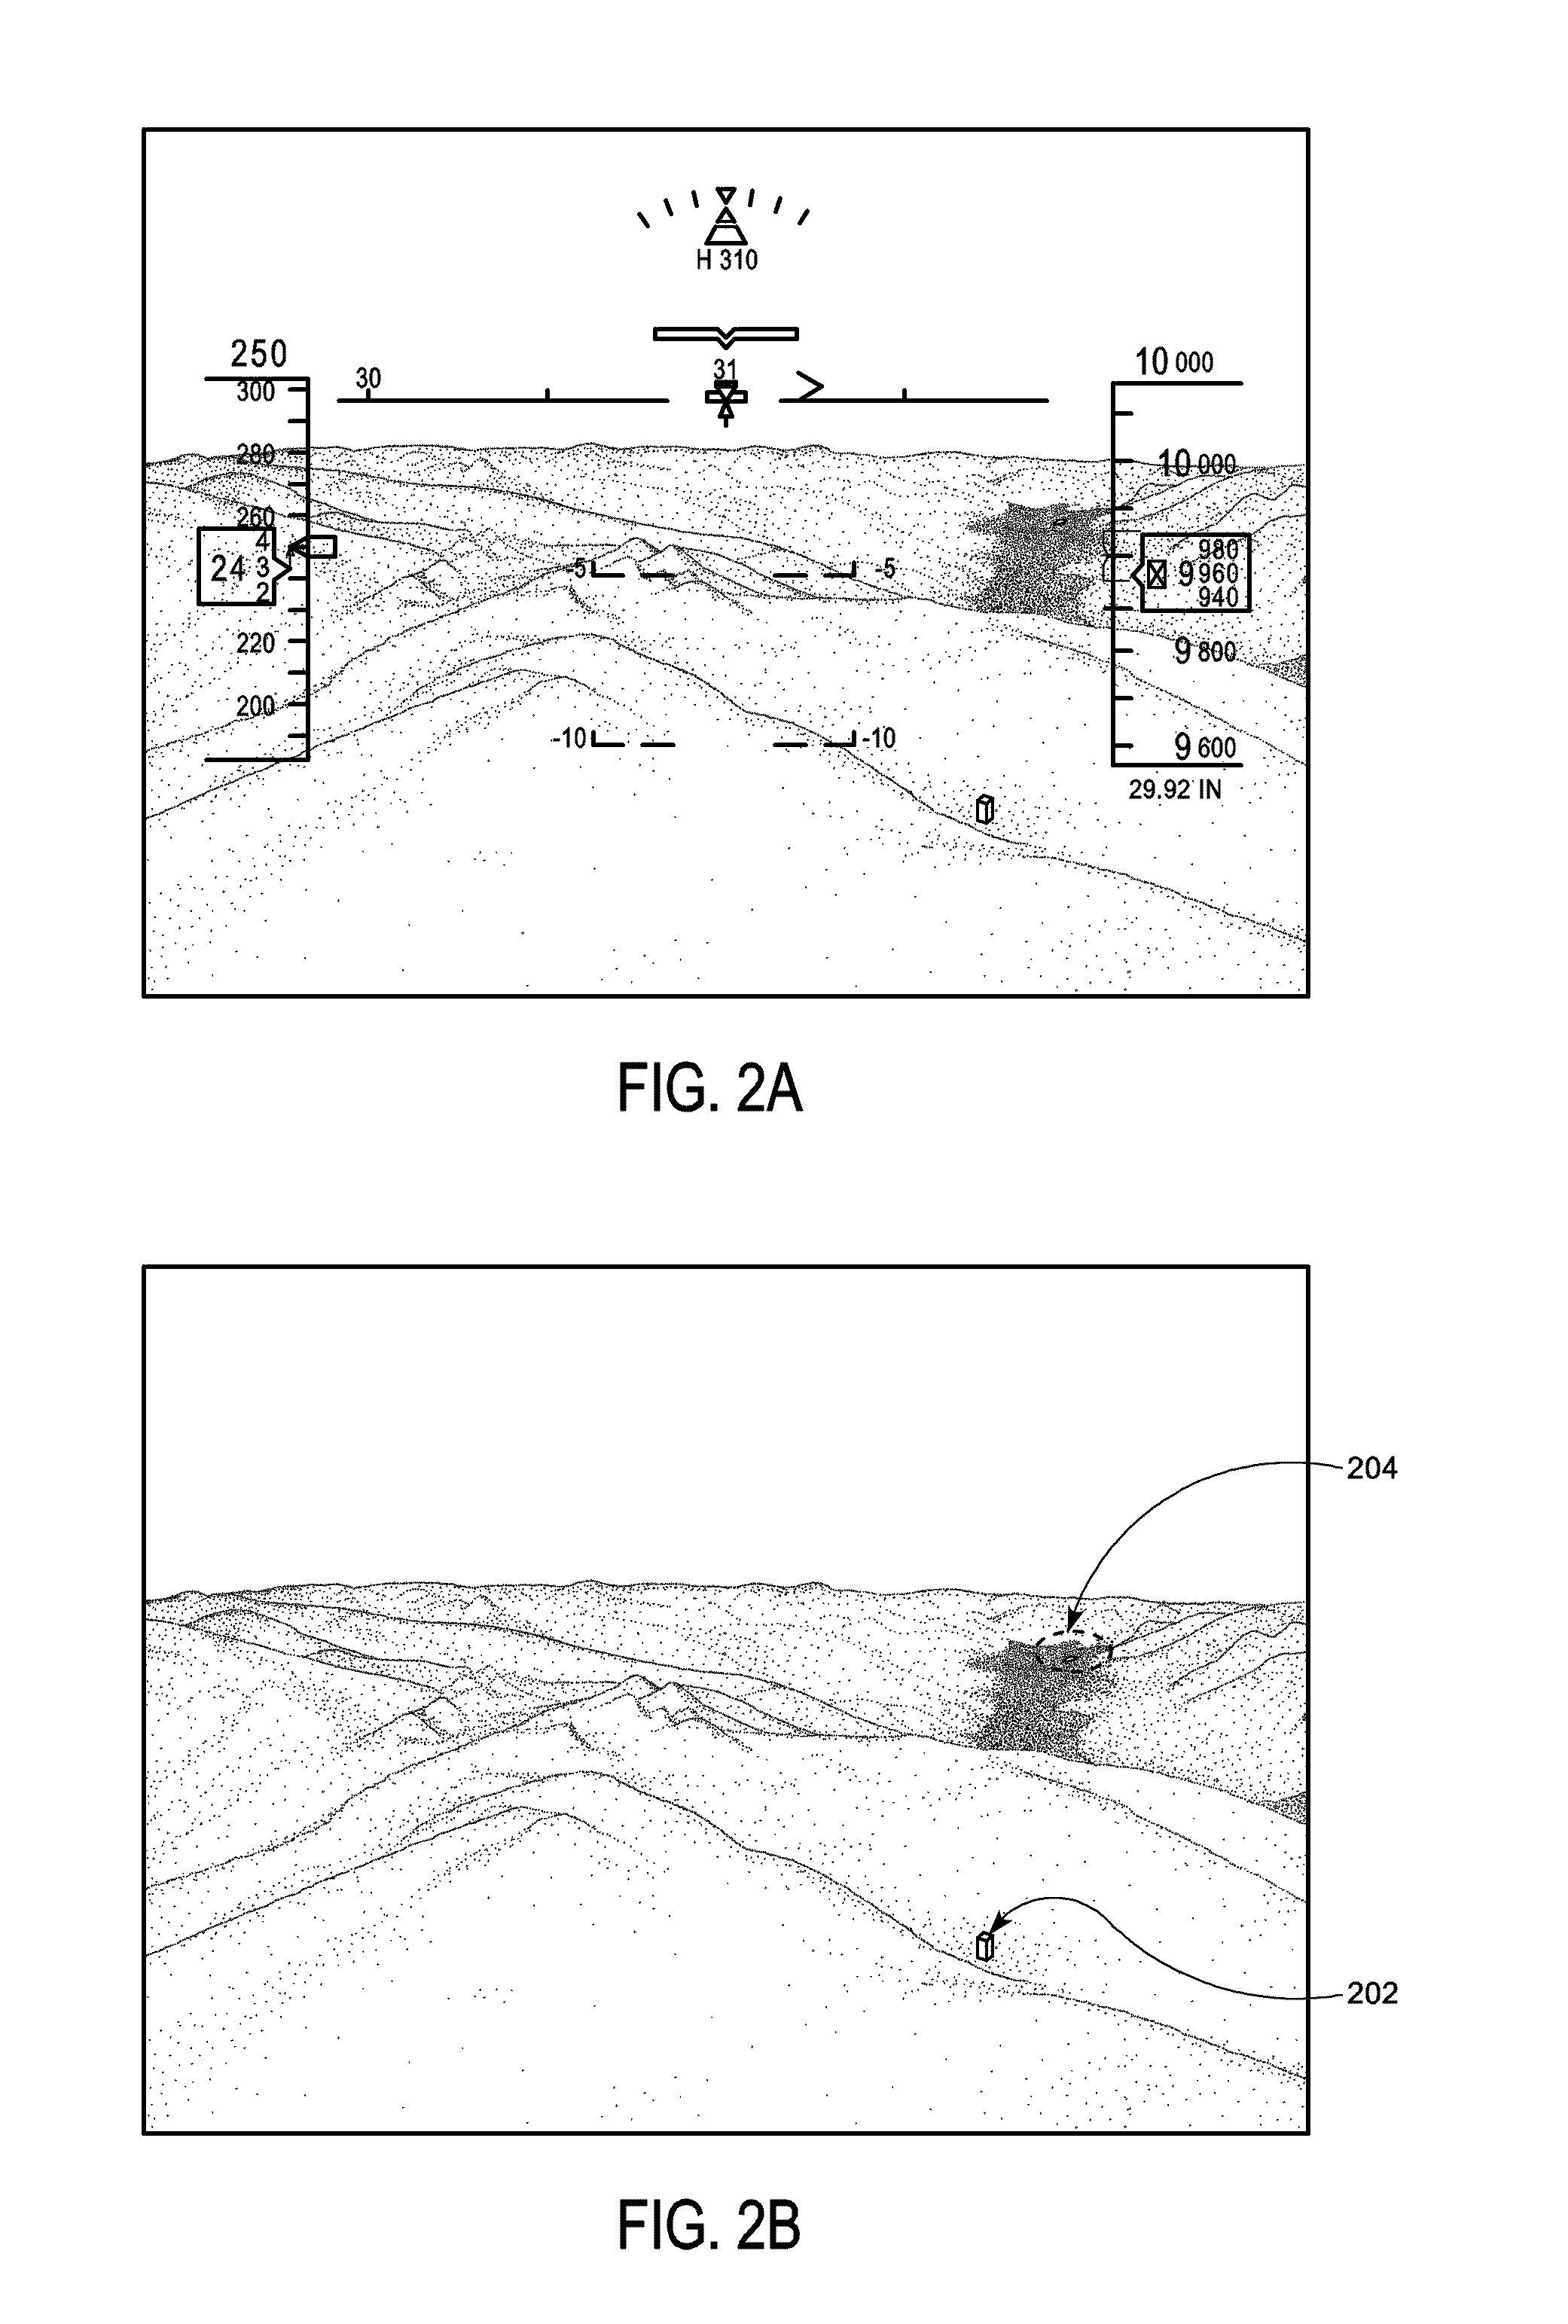 System, apparatus, and method for enhancing the image presented on an aircraft display unit through location highlighters